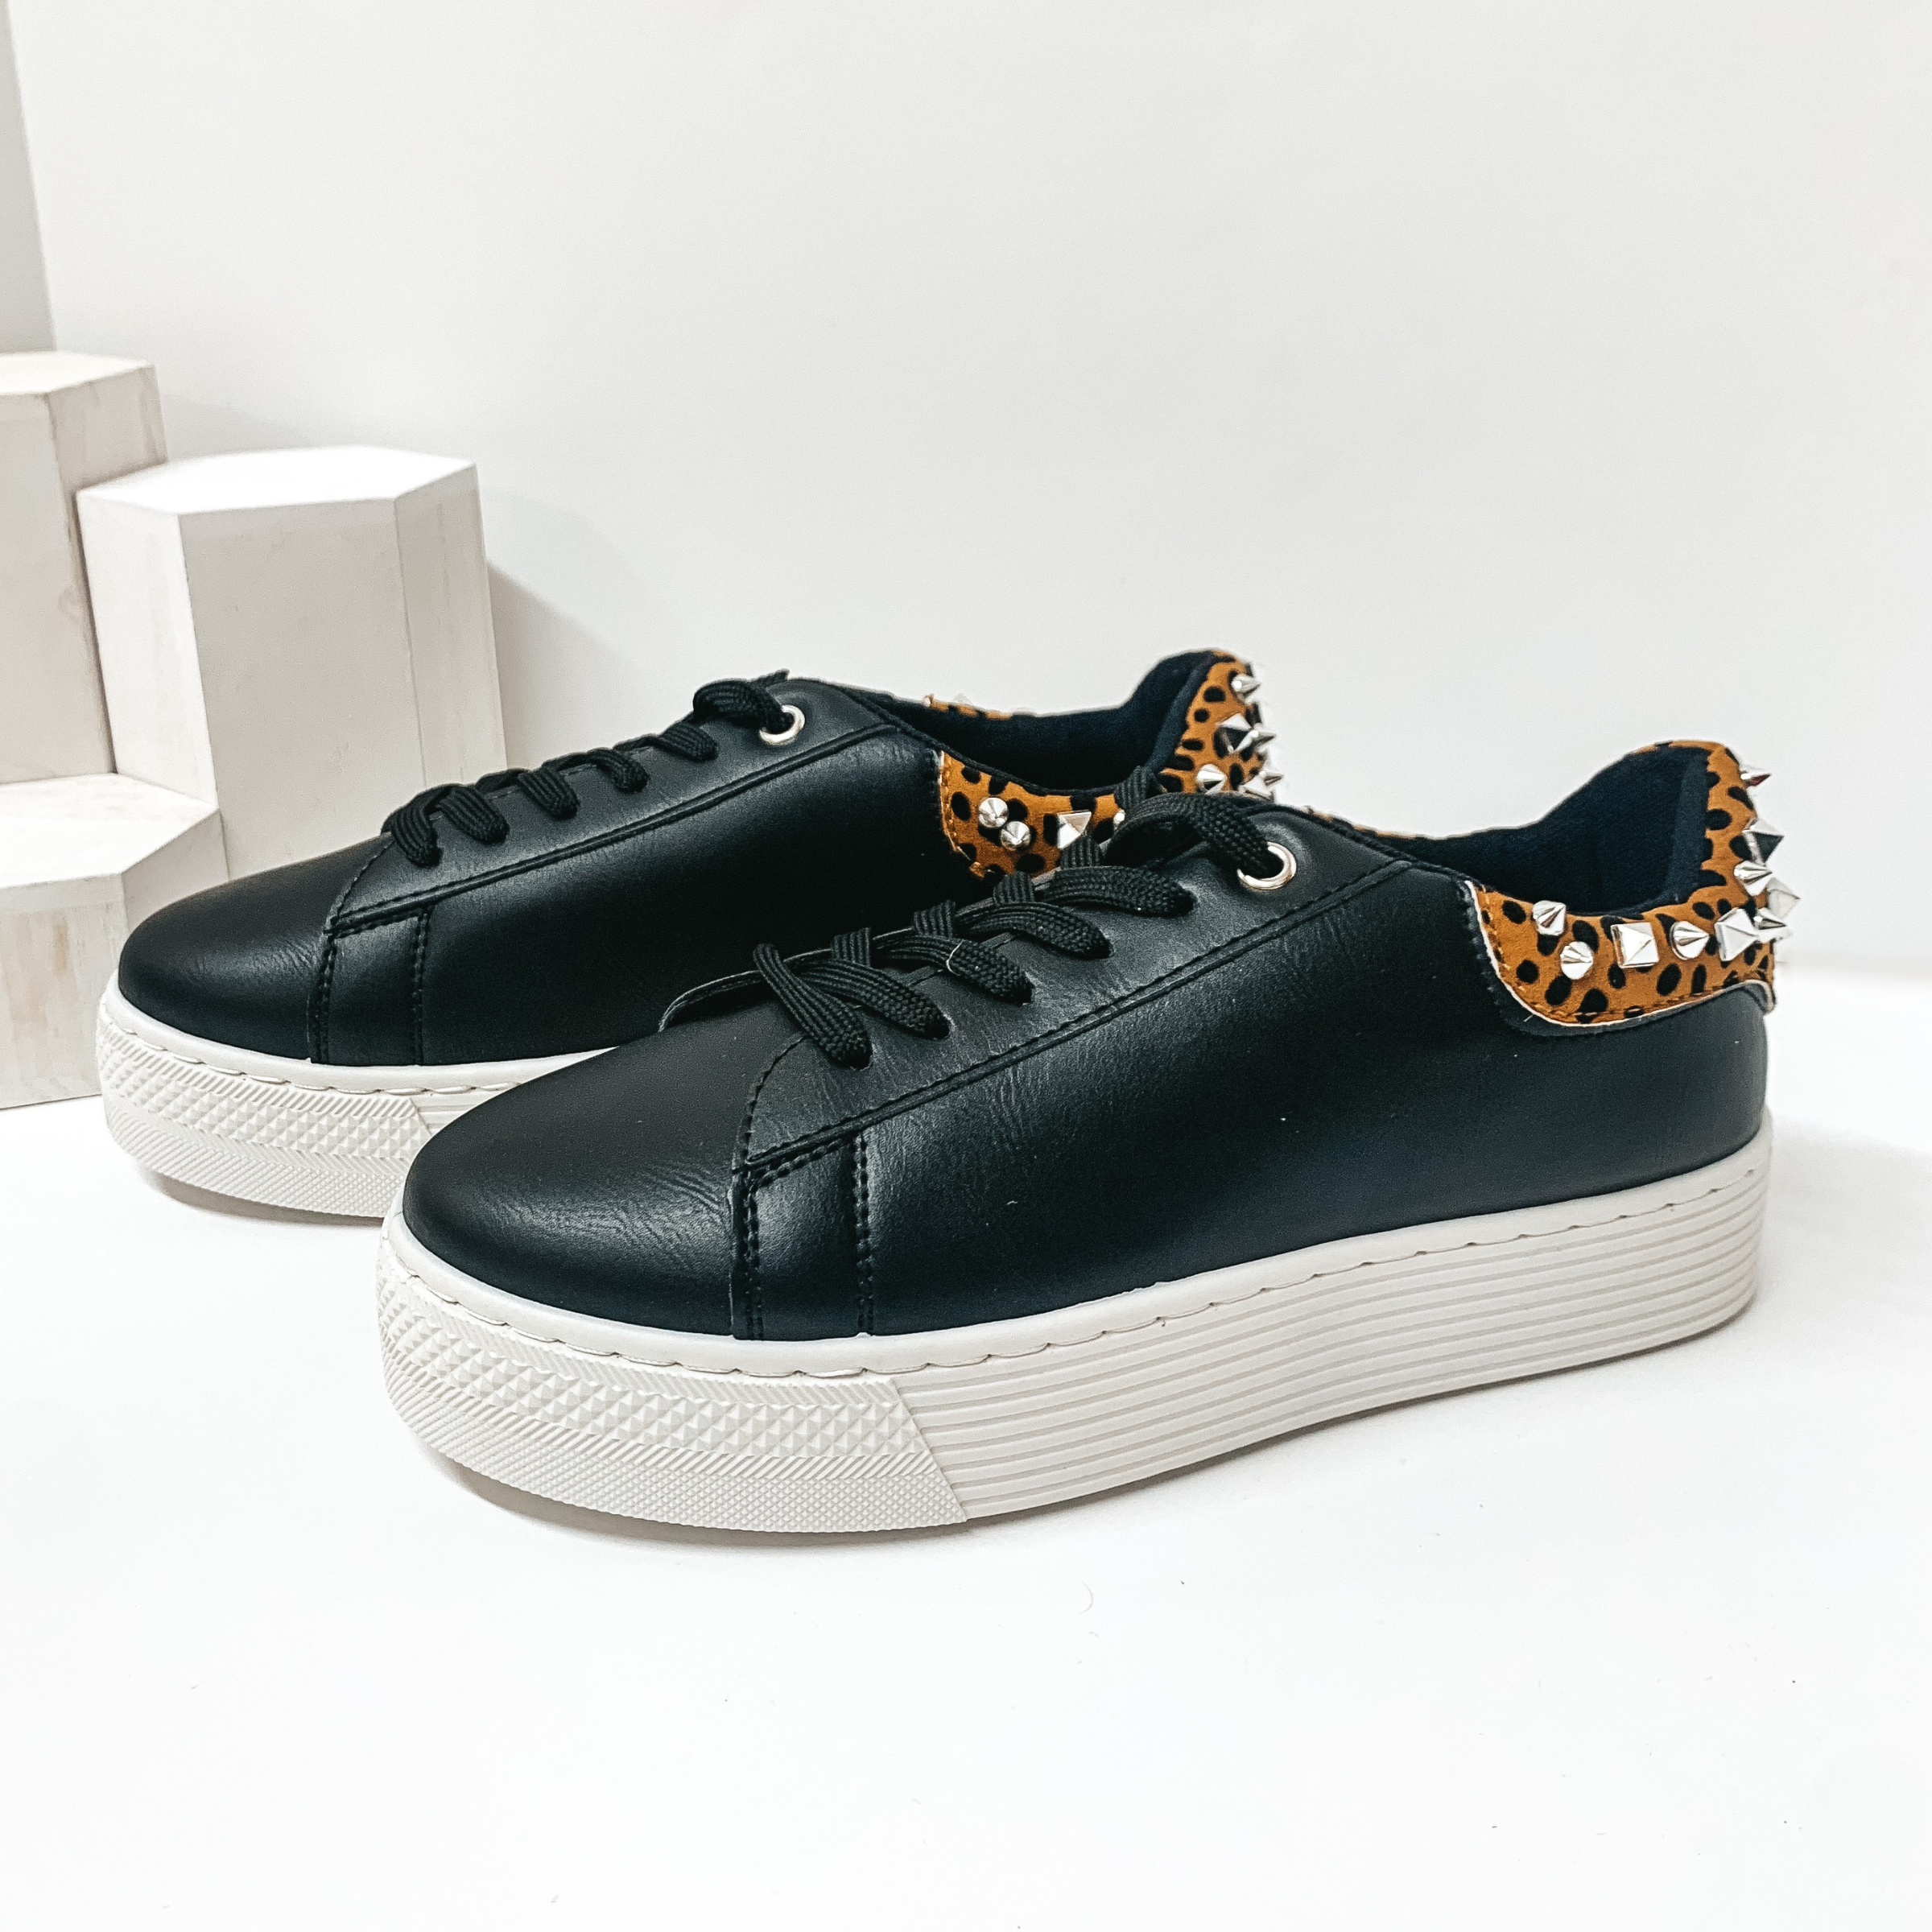 Studded Chic Lace Up Leopard Heel Platform Sneakers in Black - Giddy Up Glamour Boutique